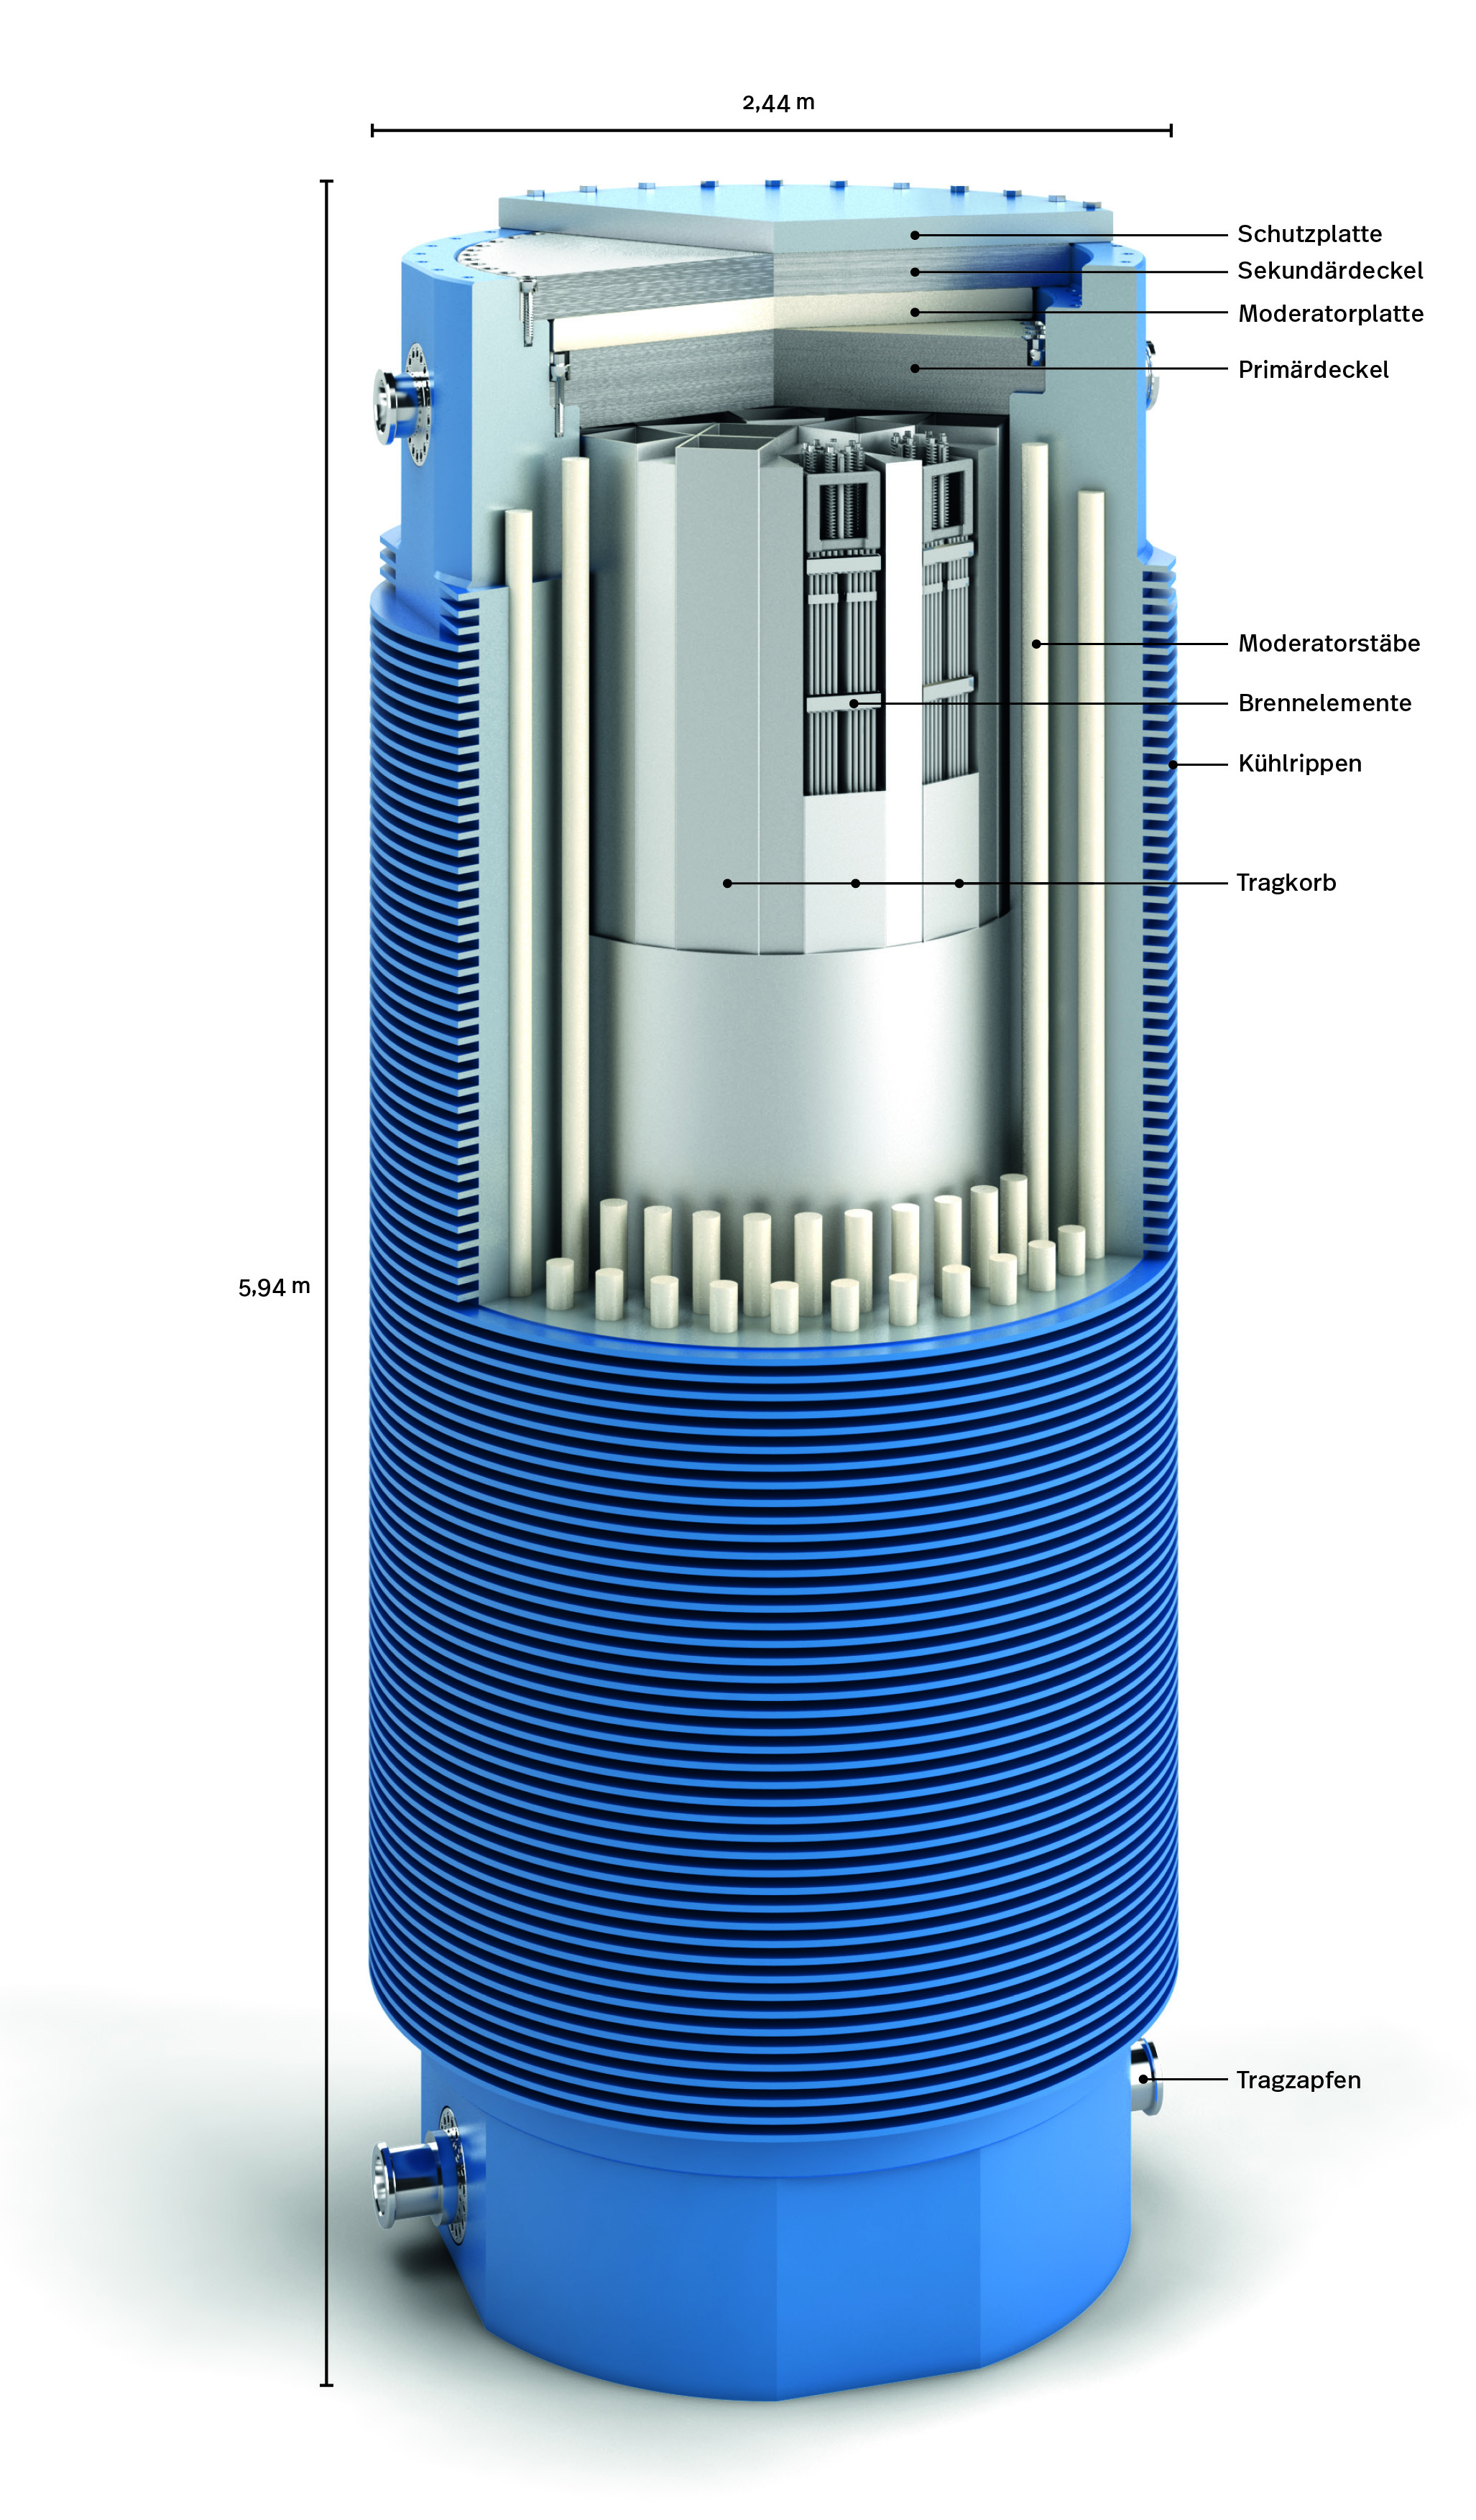 Figure 1: Structure and dimensions of a CASTOR® cask with spent fuel assemblies © BASE (description in German)